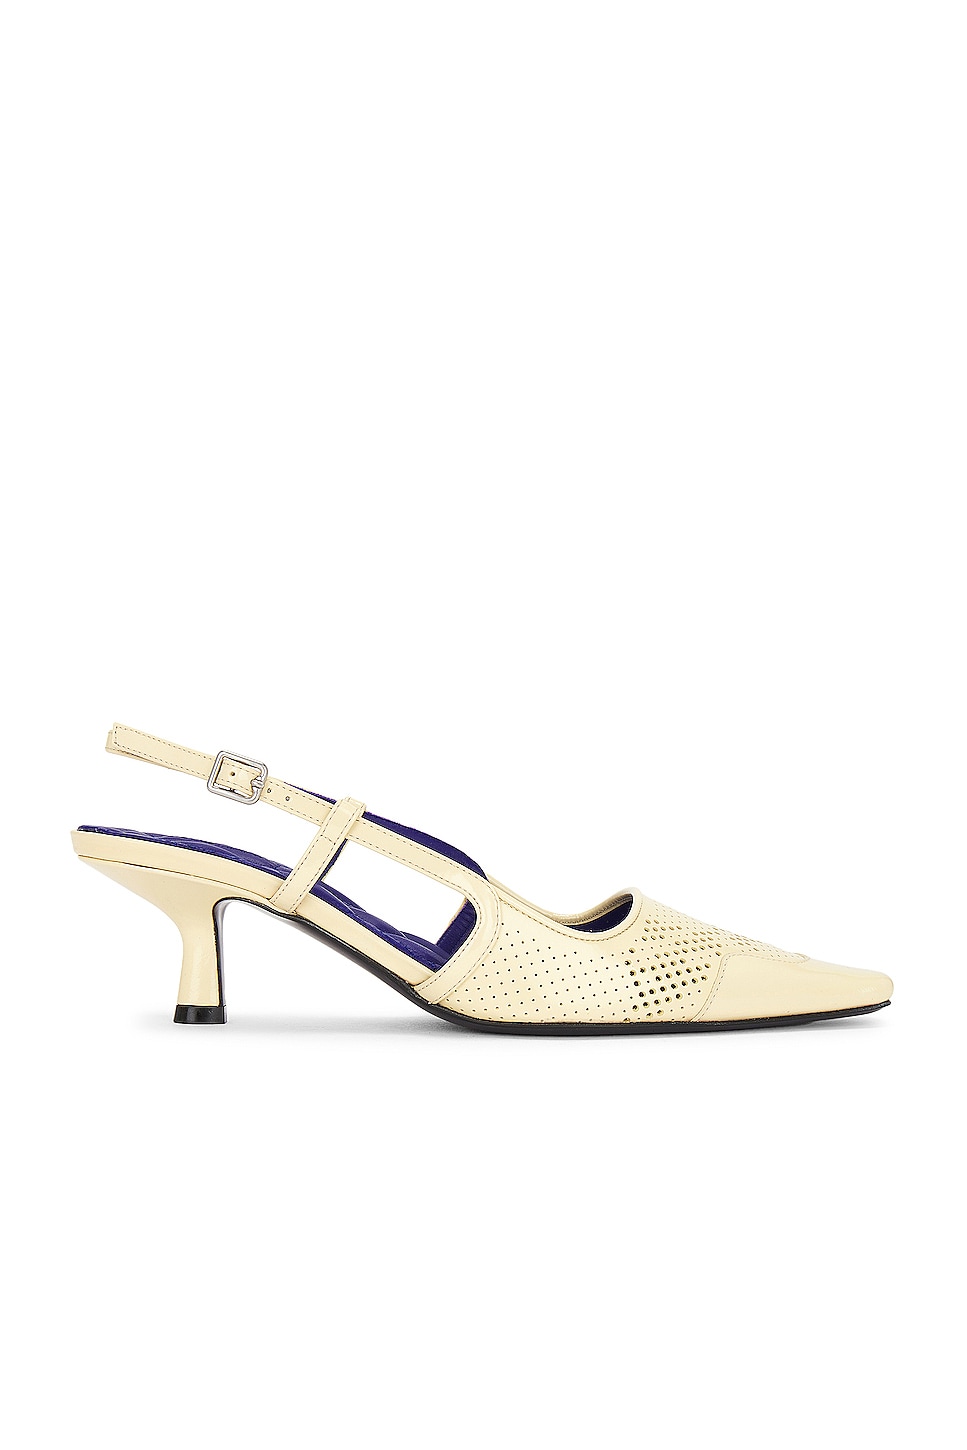 Image 1 of Burberry Chisel Sling Back Pump in Daffodil